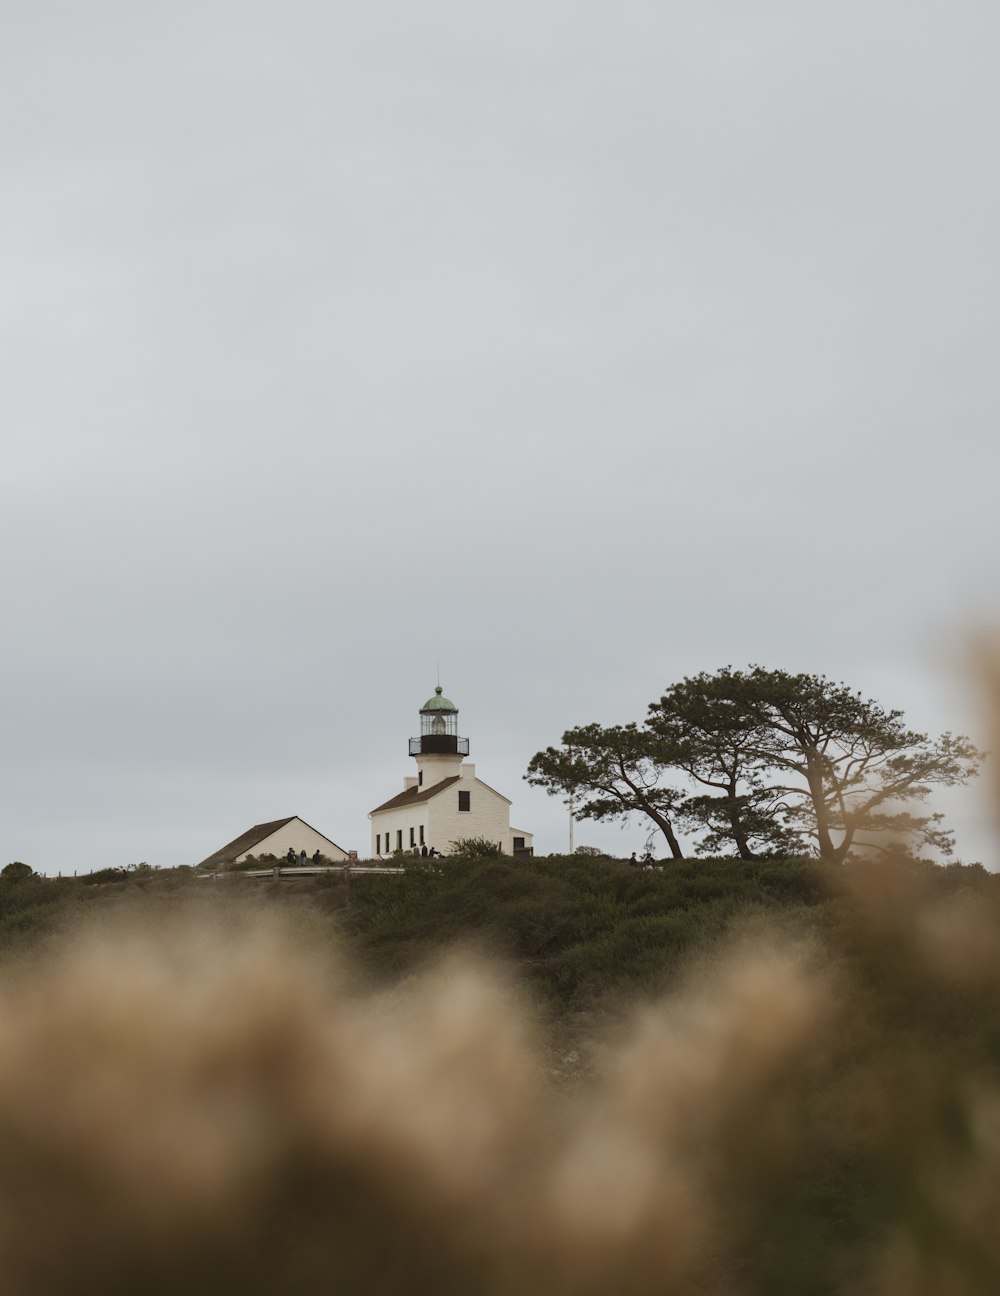 a lighthouse on a hill with trees in the background